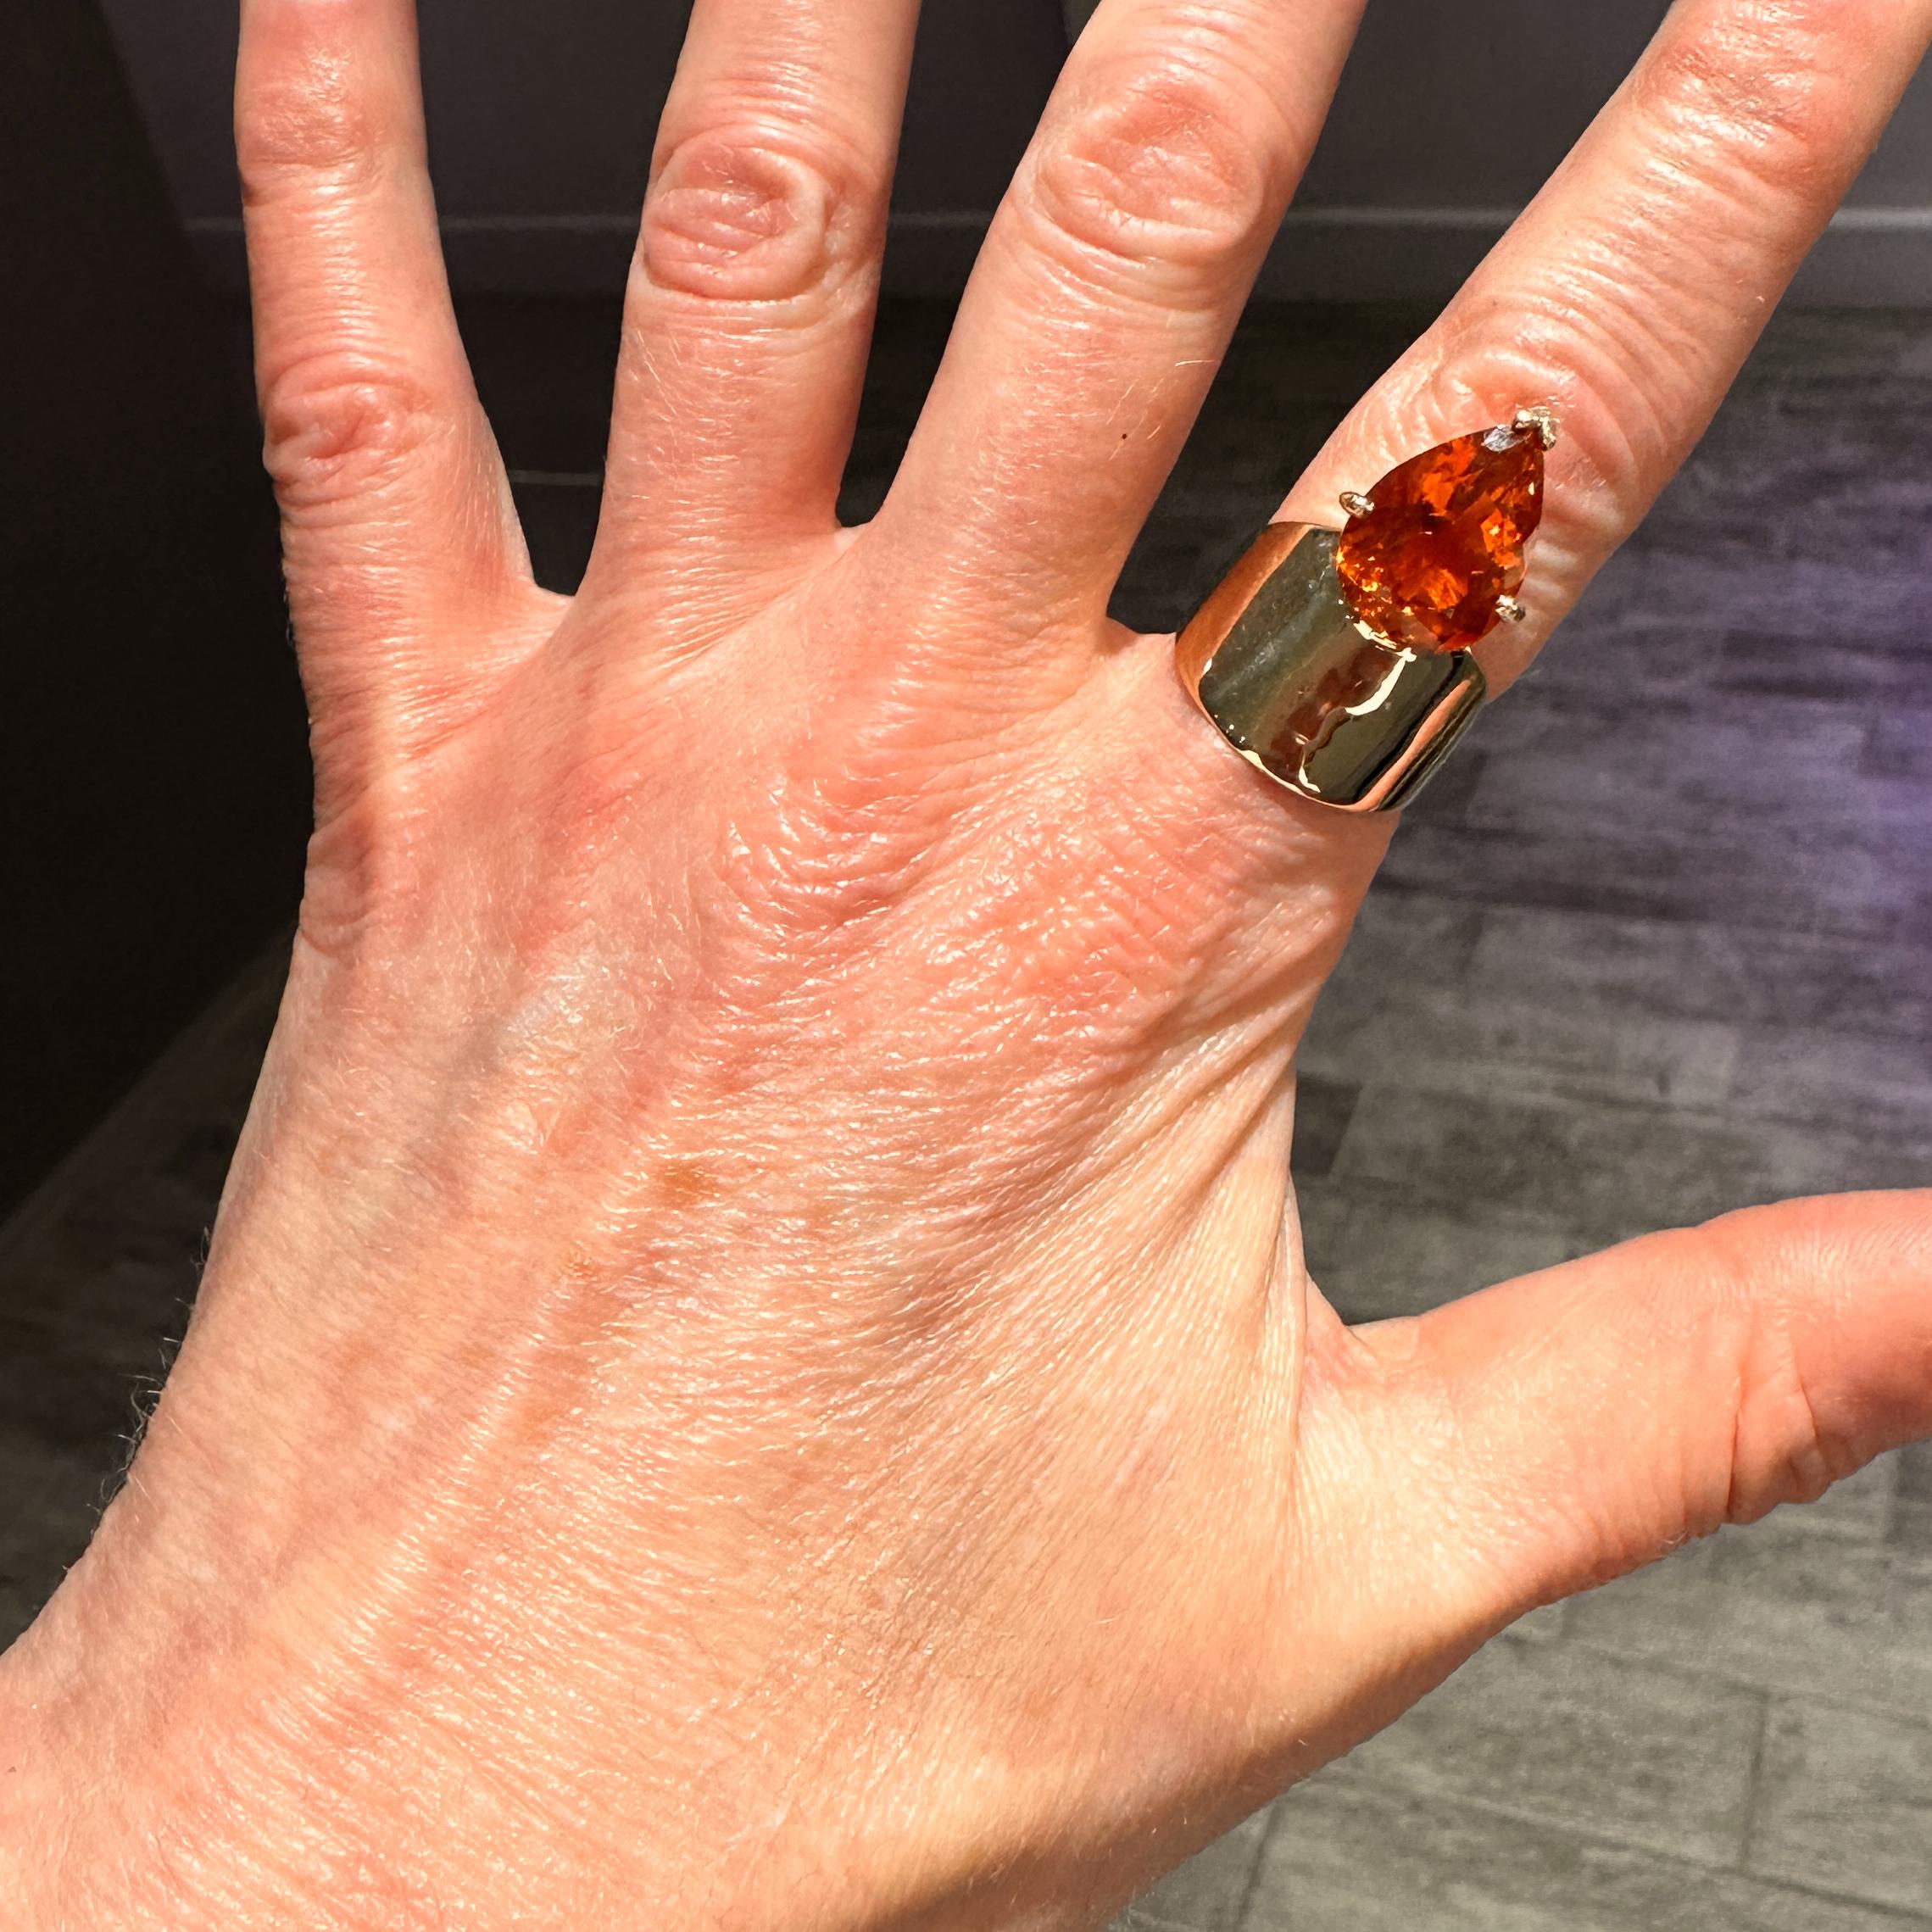 Sail off into the sunset with this gorgeous new statement ring from Eytan Brandes.  Besides the stone, this is basically a cigar band -- tapering from 16mm in the front to a comfortable 4mm in the back.  But Eytan has perched a fiery madeira citrine